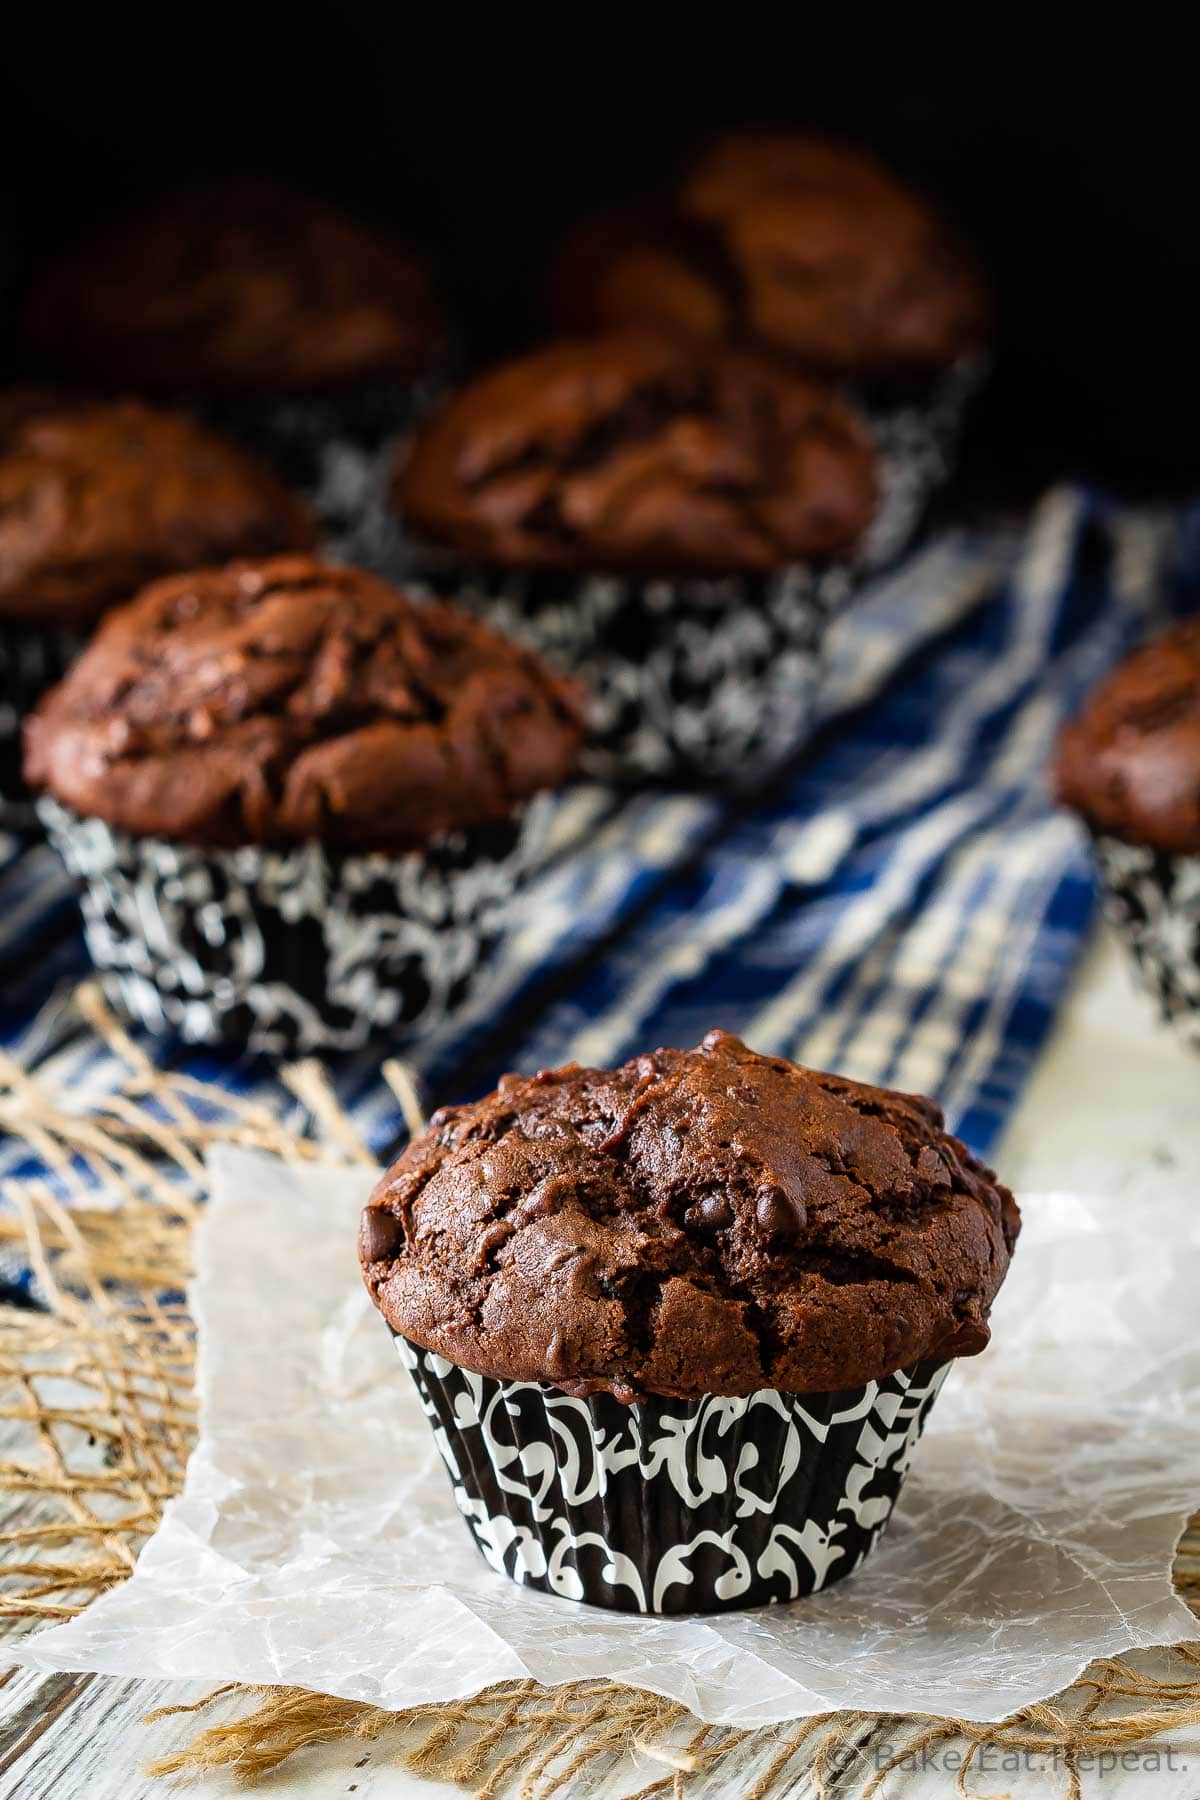 These chocolate zucchini muffins are a great way to use up all that garden zucchini! Moist, chocolatey, delicious muffins that everyone will love!